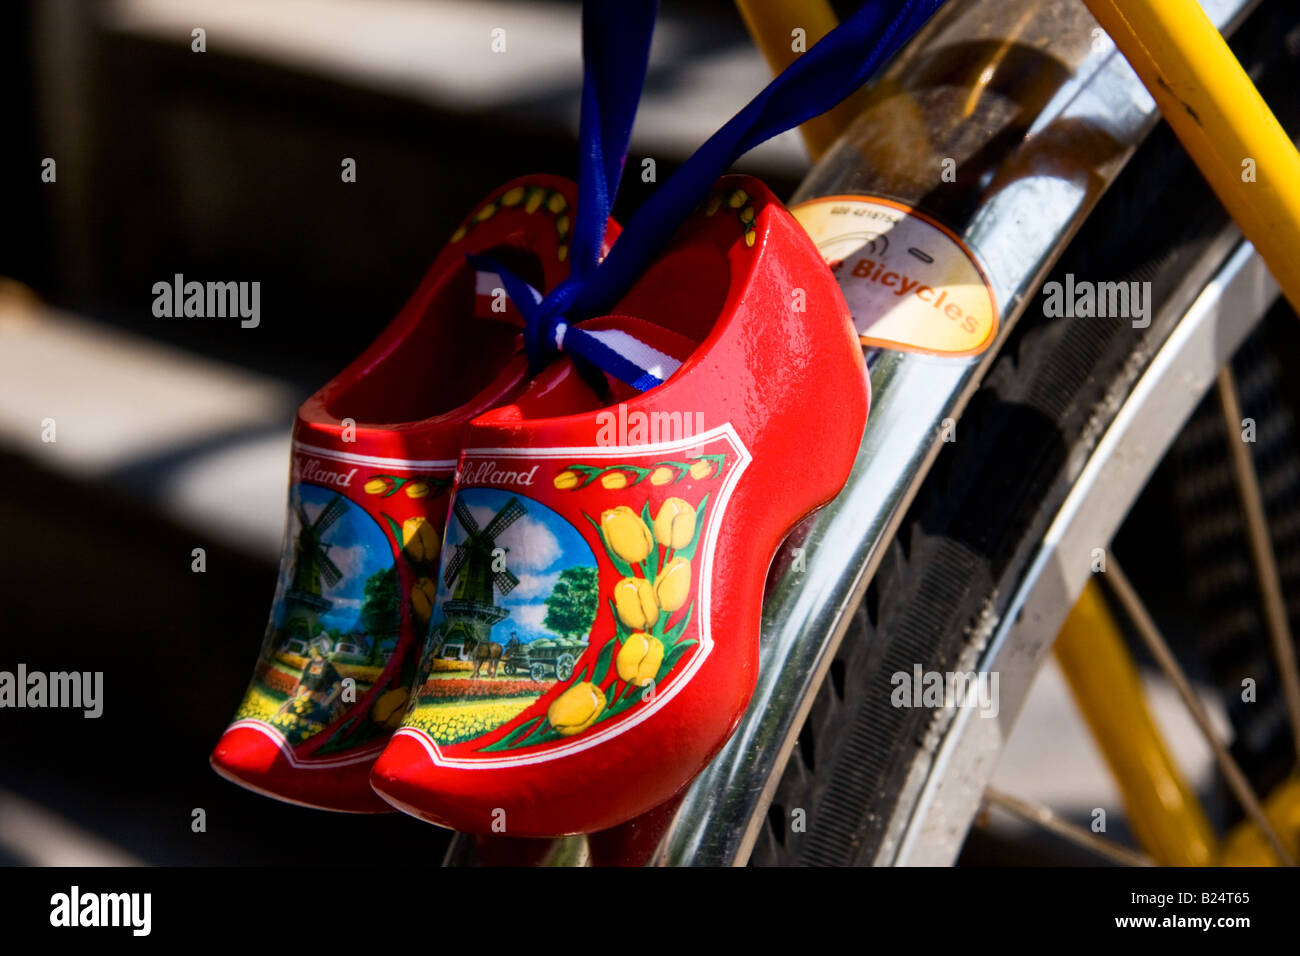 Minature souvenir clogs attached to a bicycle in Amsterdam Holland Stock Photo